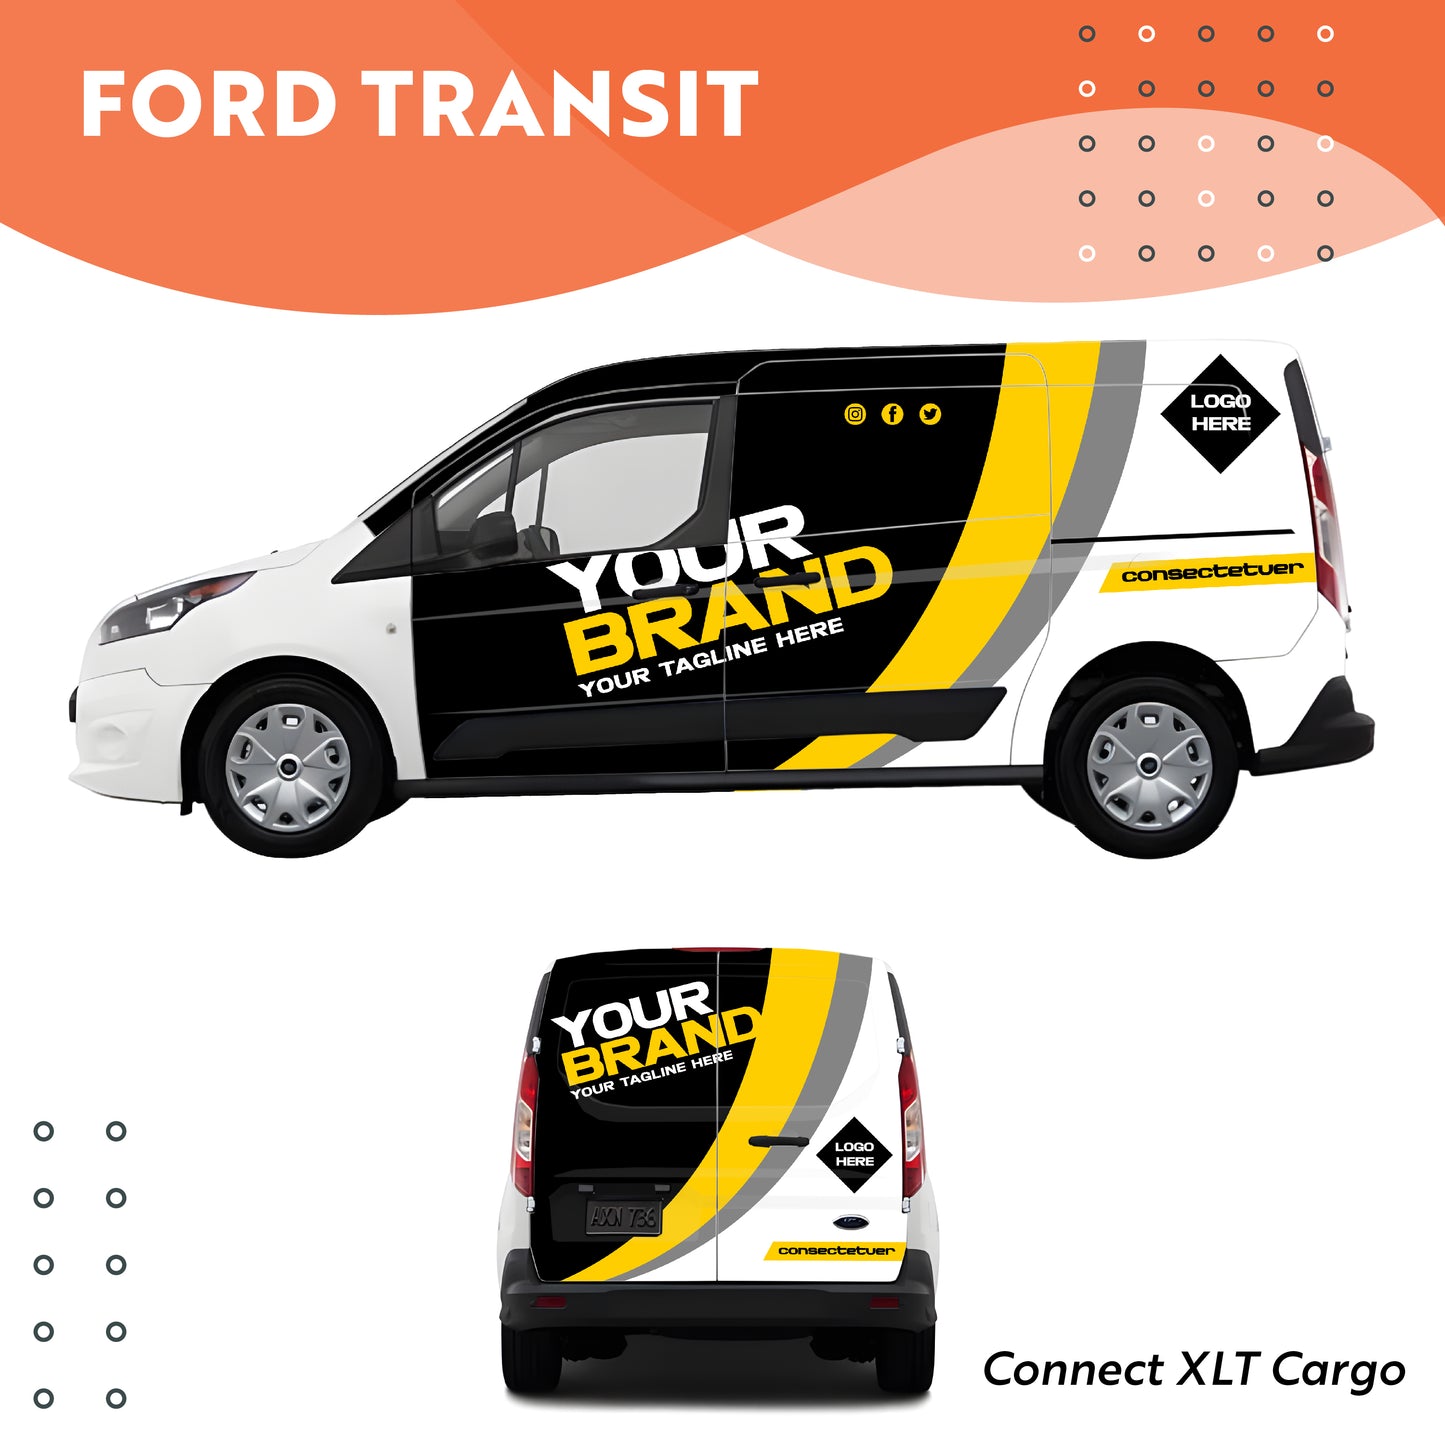 FORD TRANSIT Connect XLT Cargo Wrap